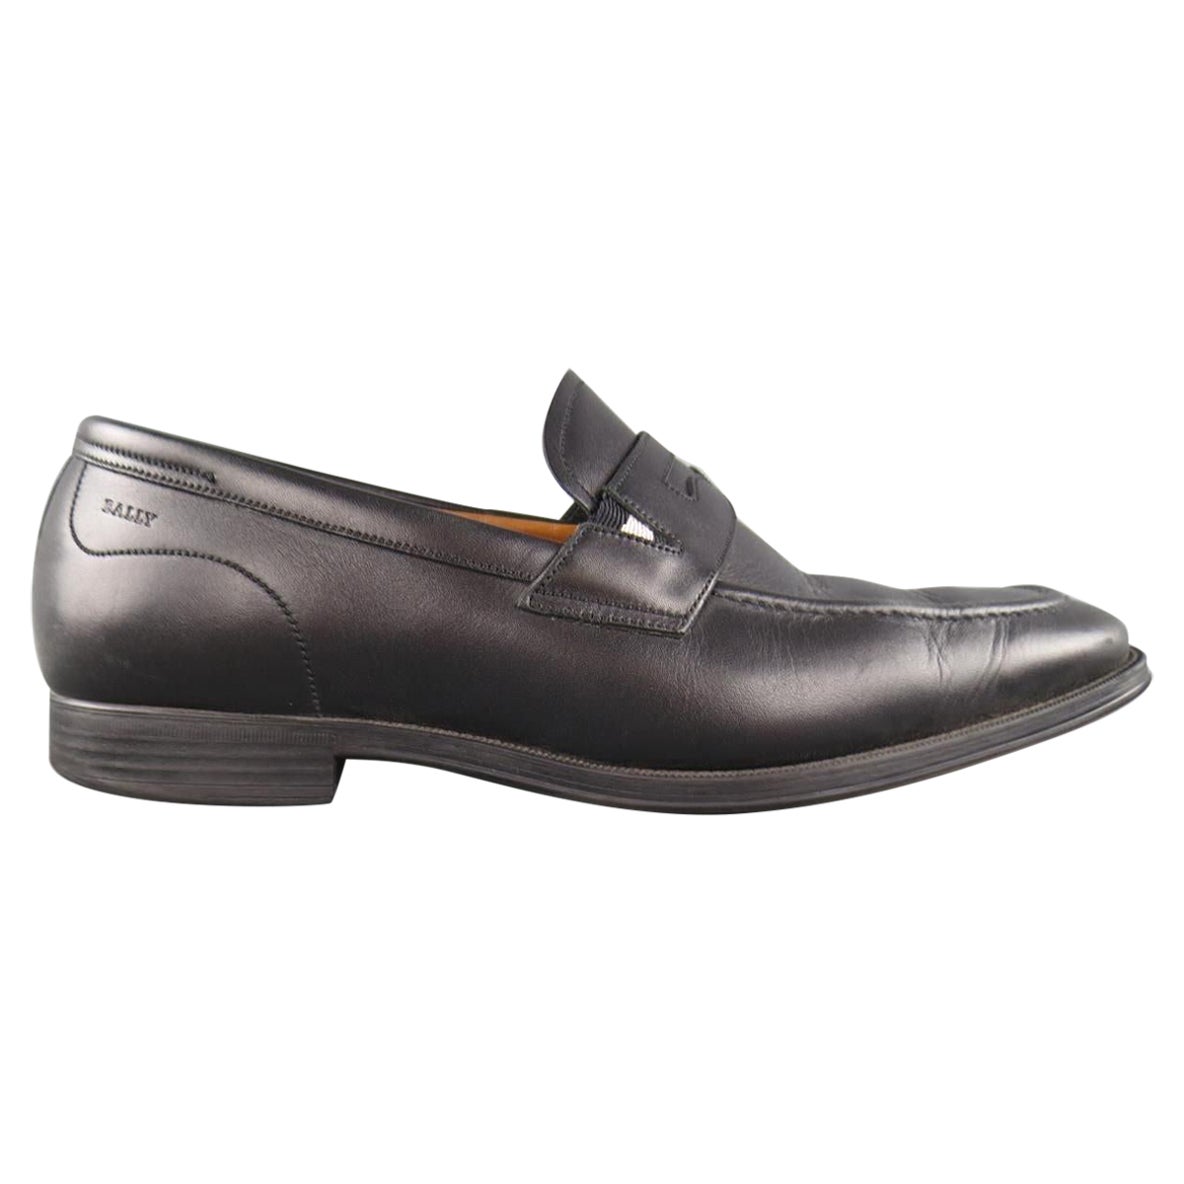 BALLY Size 7.5 Black Leather Penny Loafers For Sale